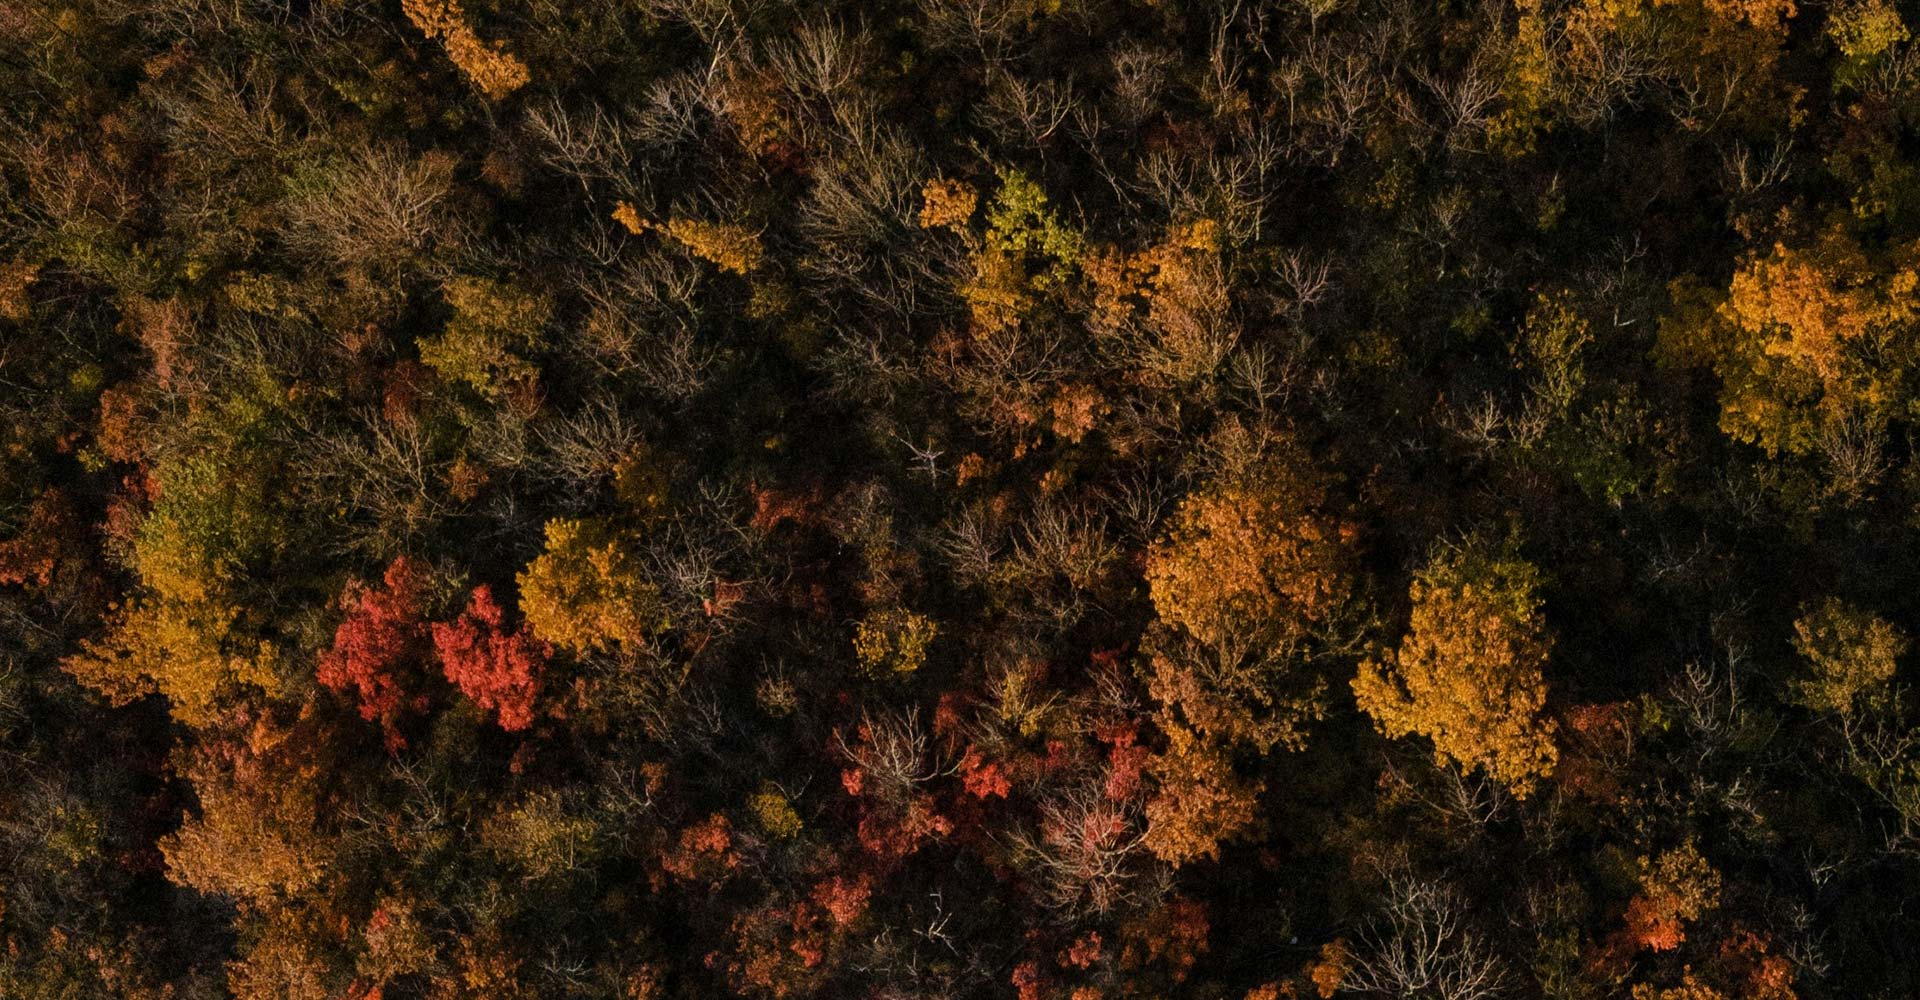 An aerial view of a dense forest showcasing a mix of green, yellow, orange, and red foliage, indicating the transition into autumn.